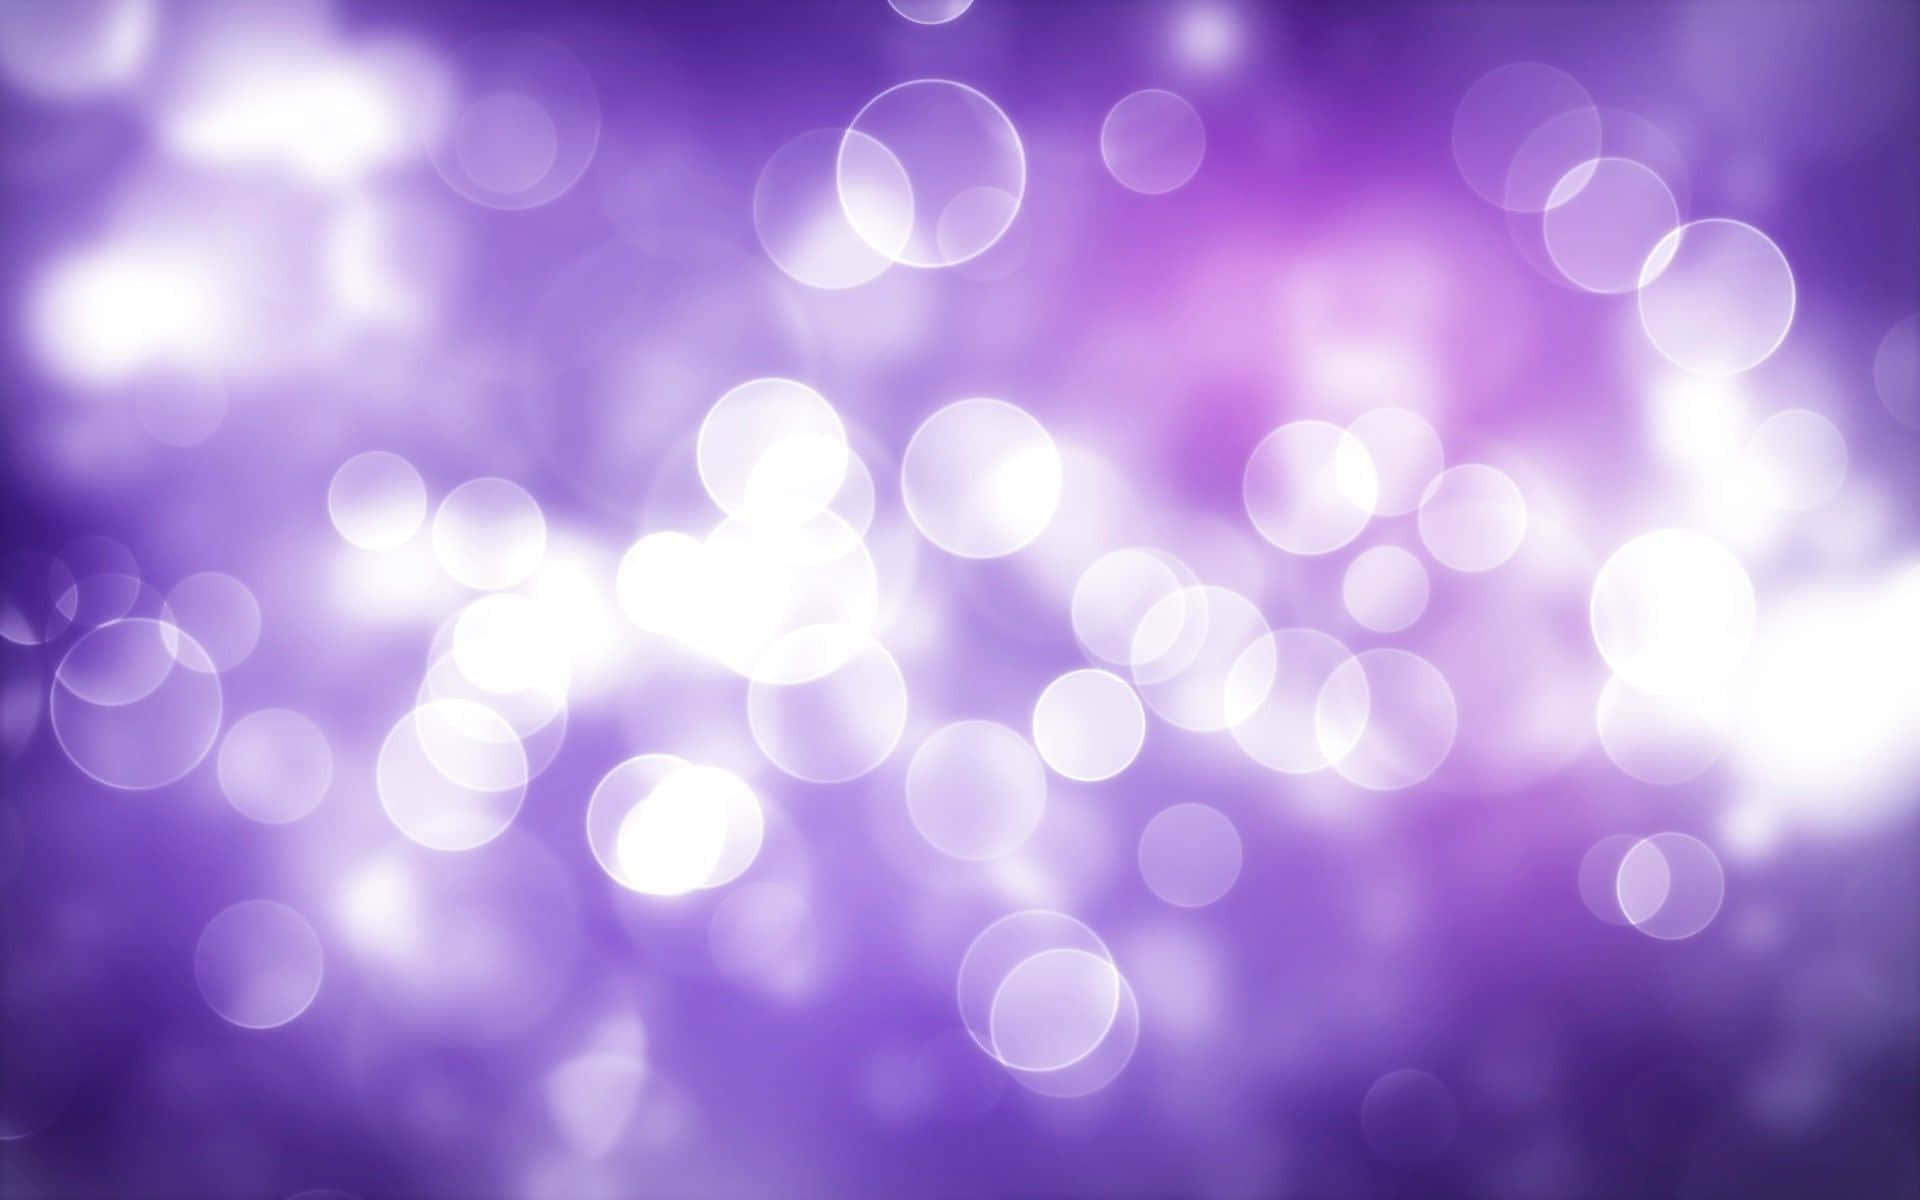 Bright and vibrant purple and white abstract background